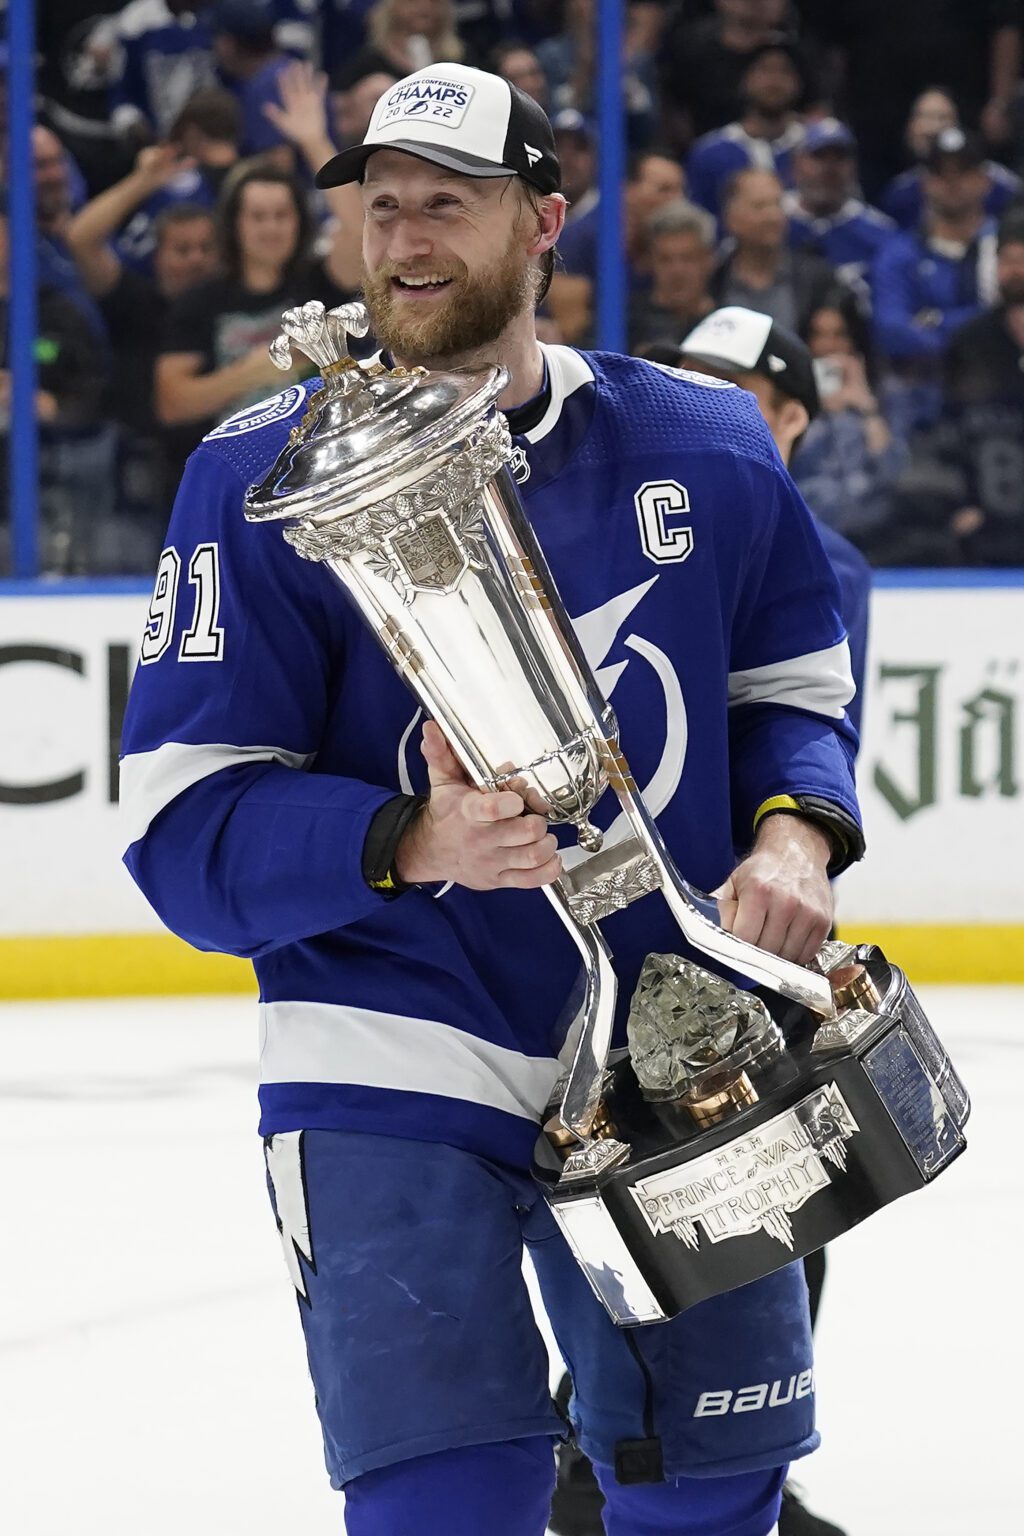 Tampa Bay Lightning center Steven Stamkos holds the Prince of Wales Trophy after defeating the New York Rangers during Game 6 of the NHL hockey Stanley Cup playoffs Eastern Conference finals June 11 in Tampa